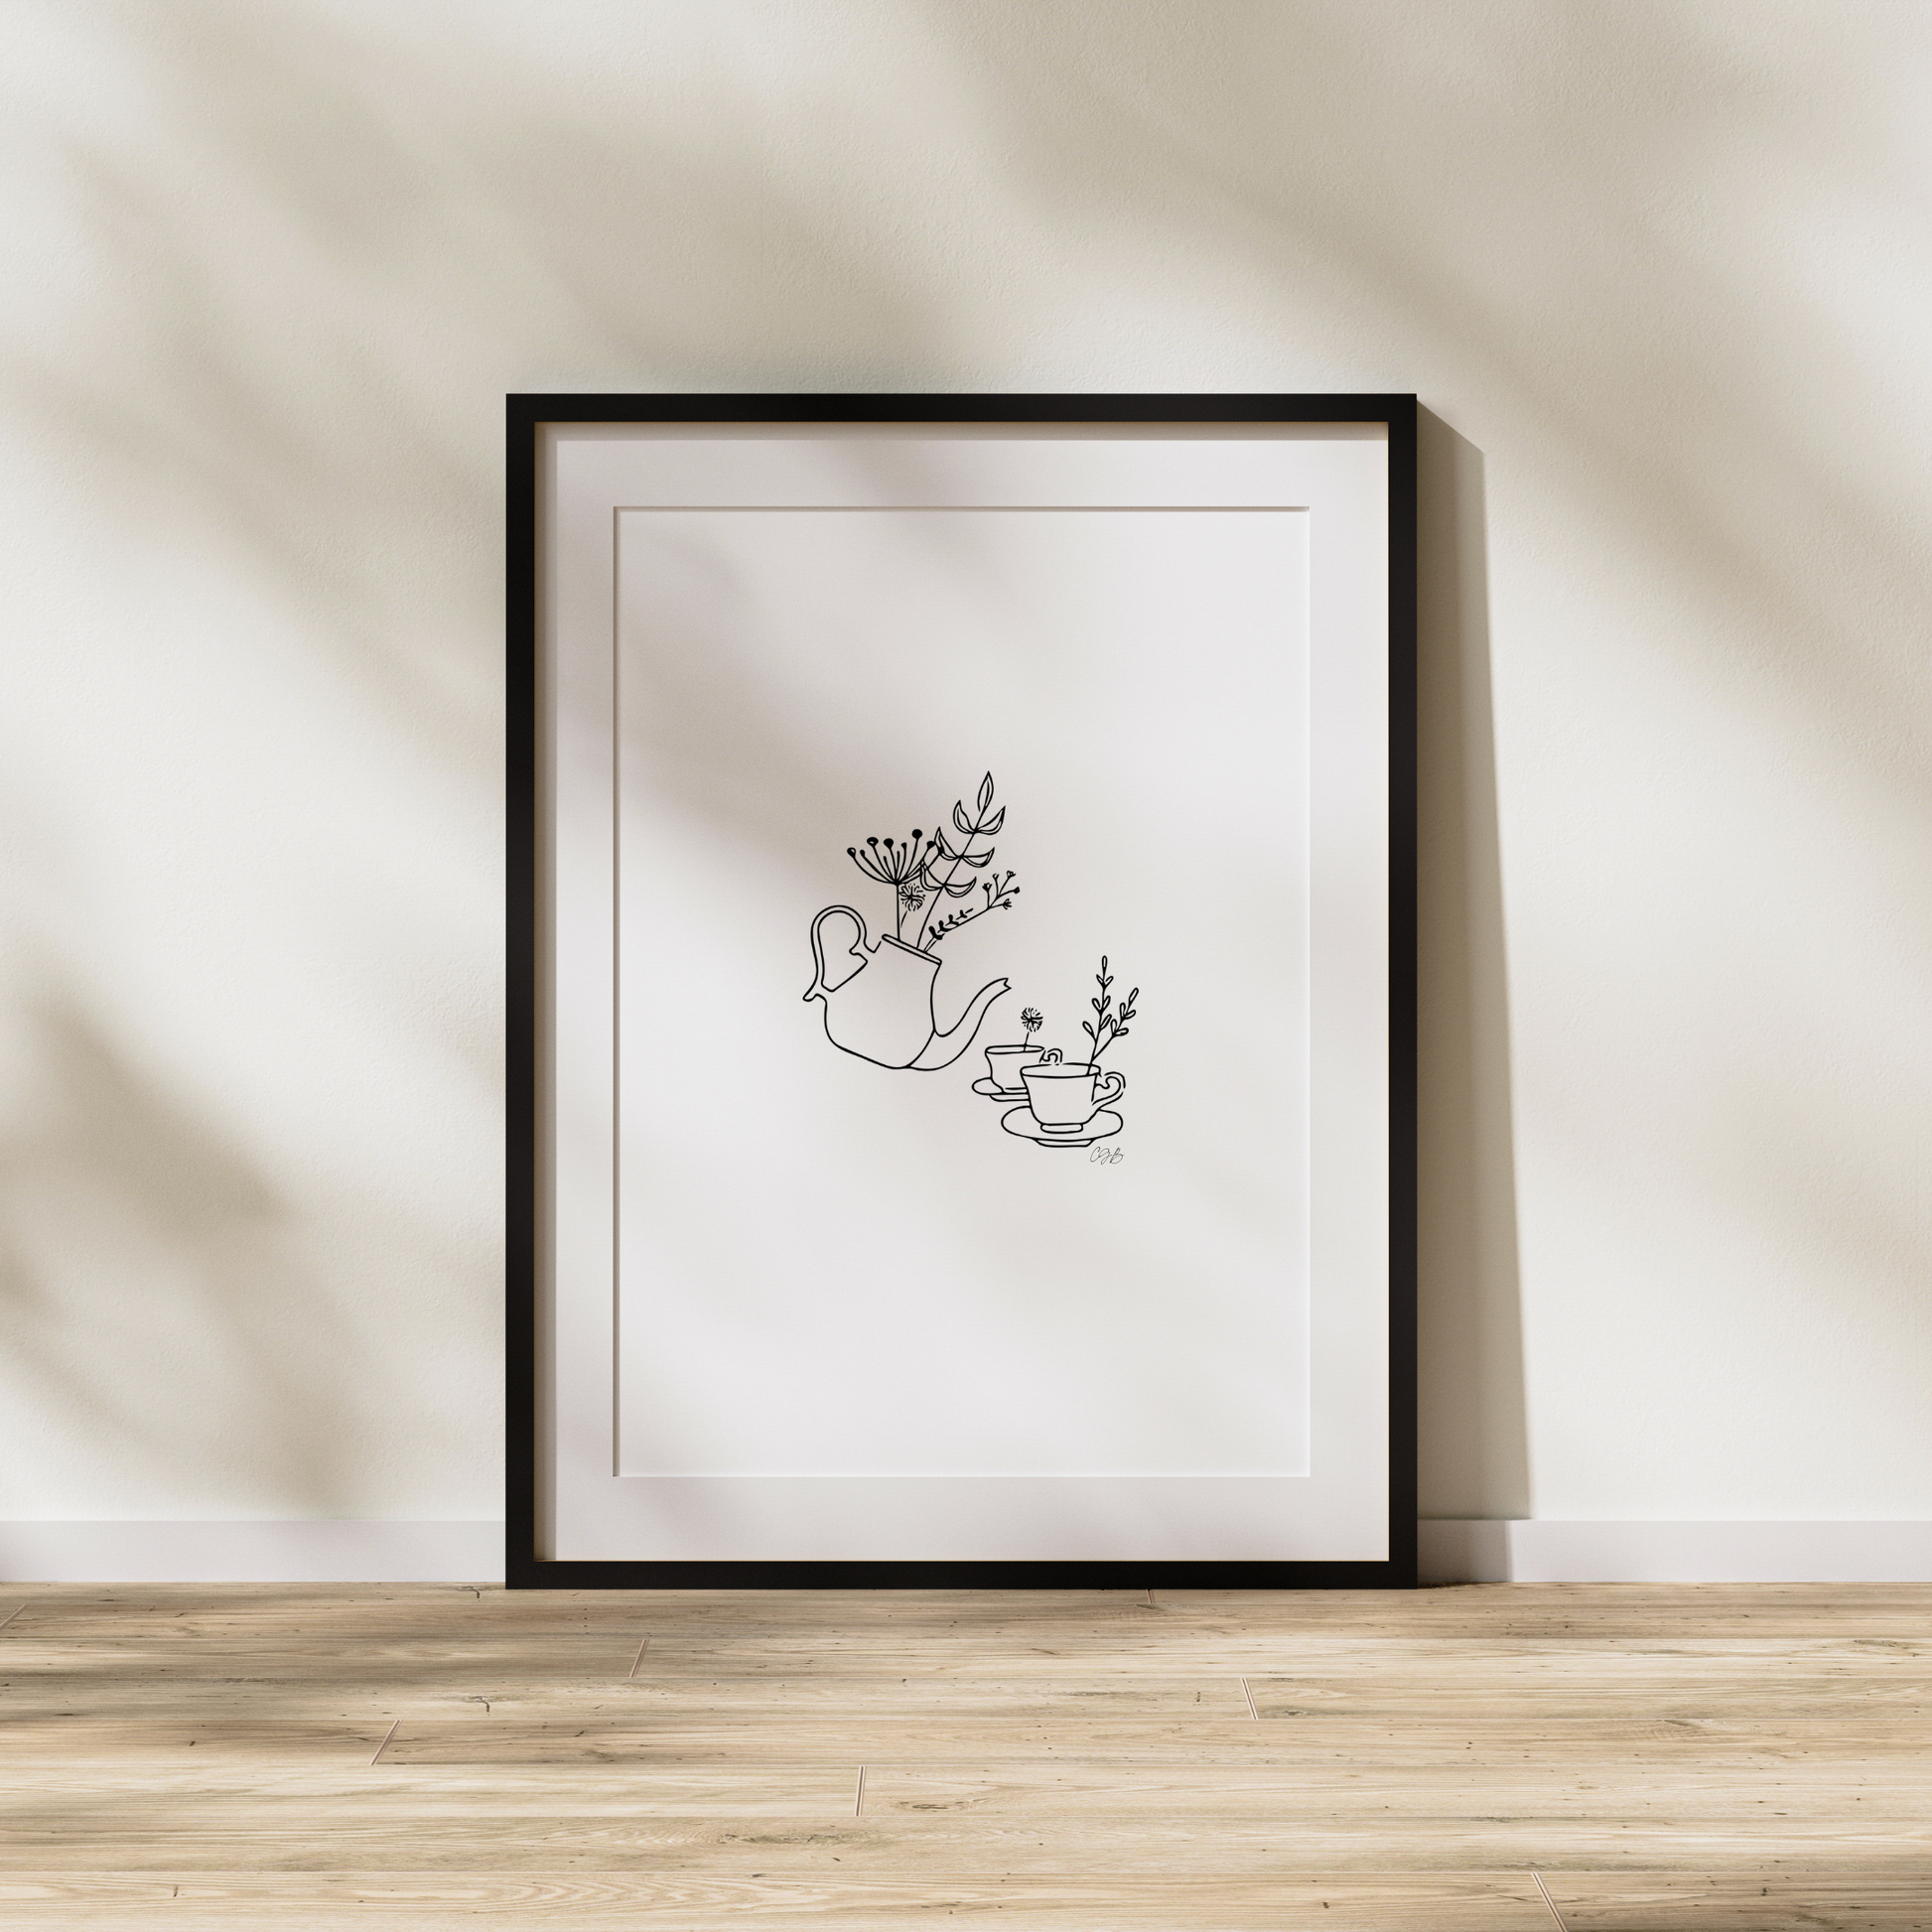 Afternoon Tea | Minimalistic A4 Wall Art | Countryside Living Decor - The Cotswold Illustrated Company